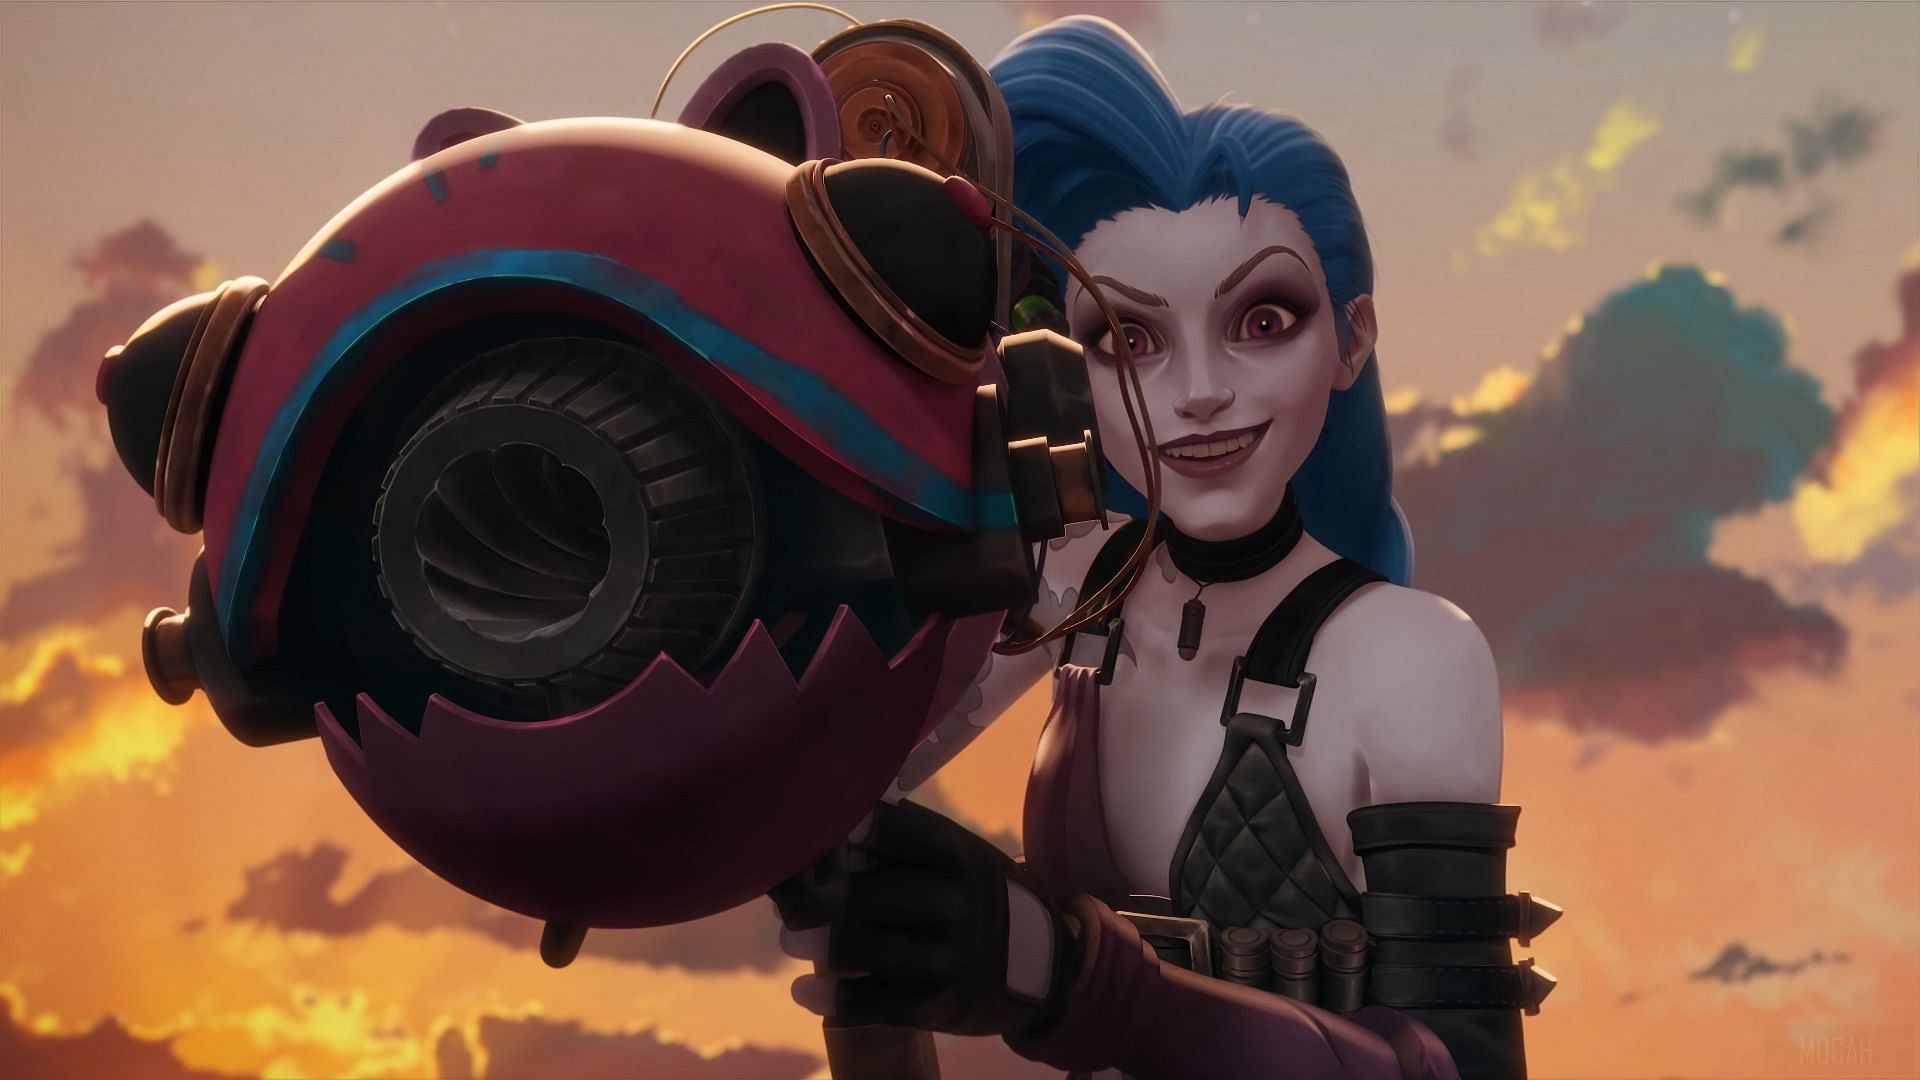 Arcane champions like Jinx can get buffs in future in Legends of Runeterra (Image via Riot Games)